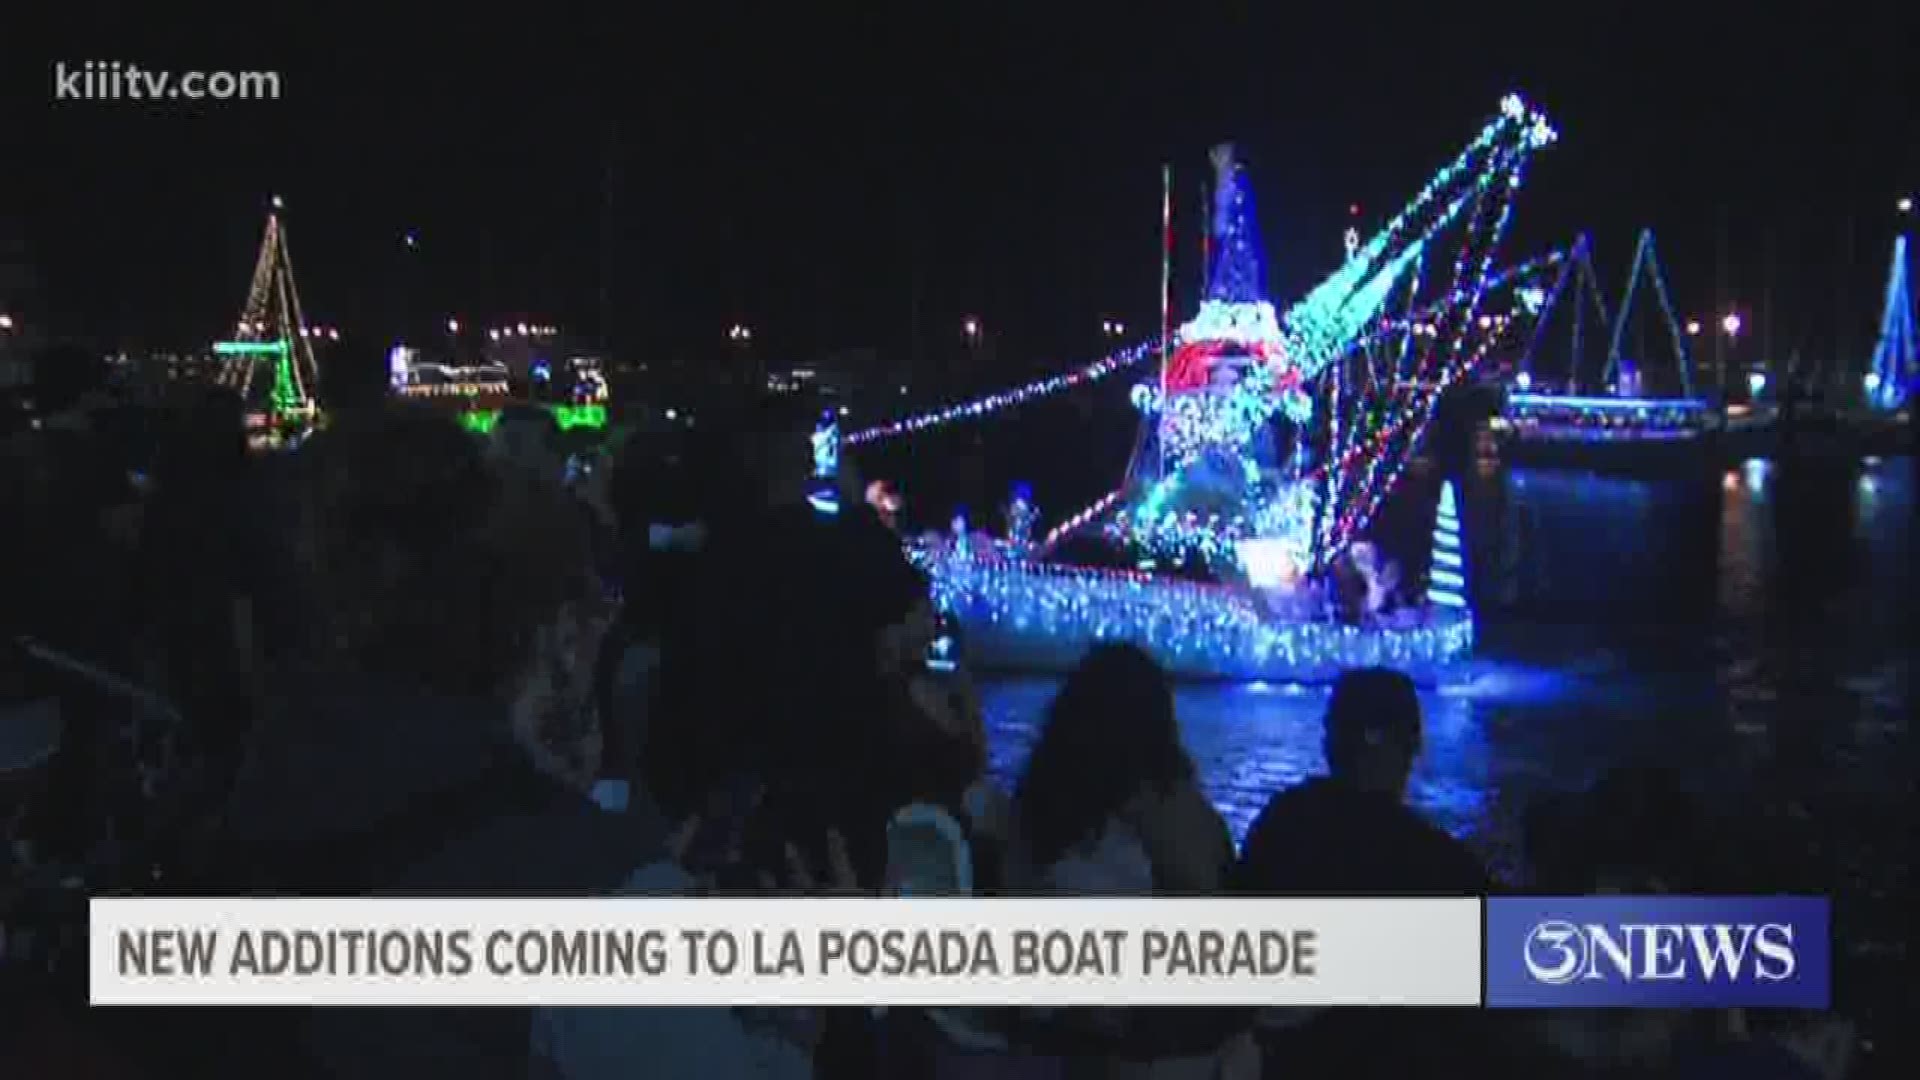 The La Posada Lighted Boat Parade happens the first Friday and Saturday of December.